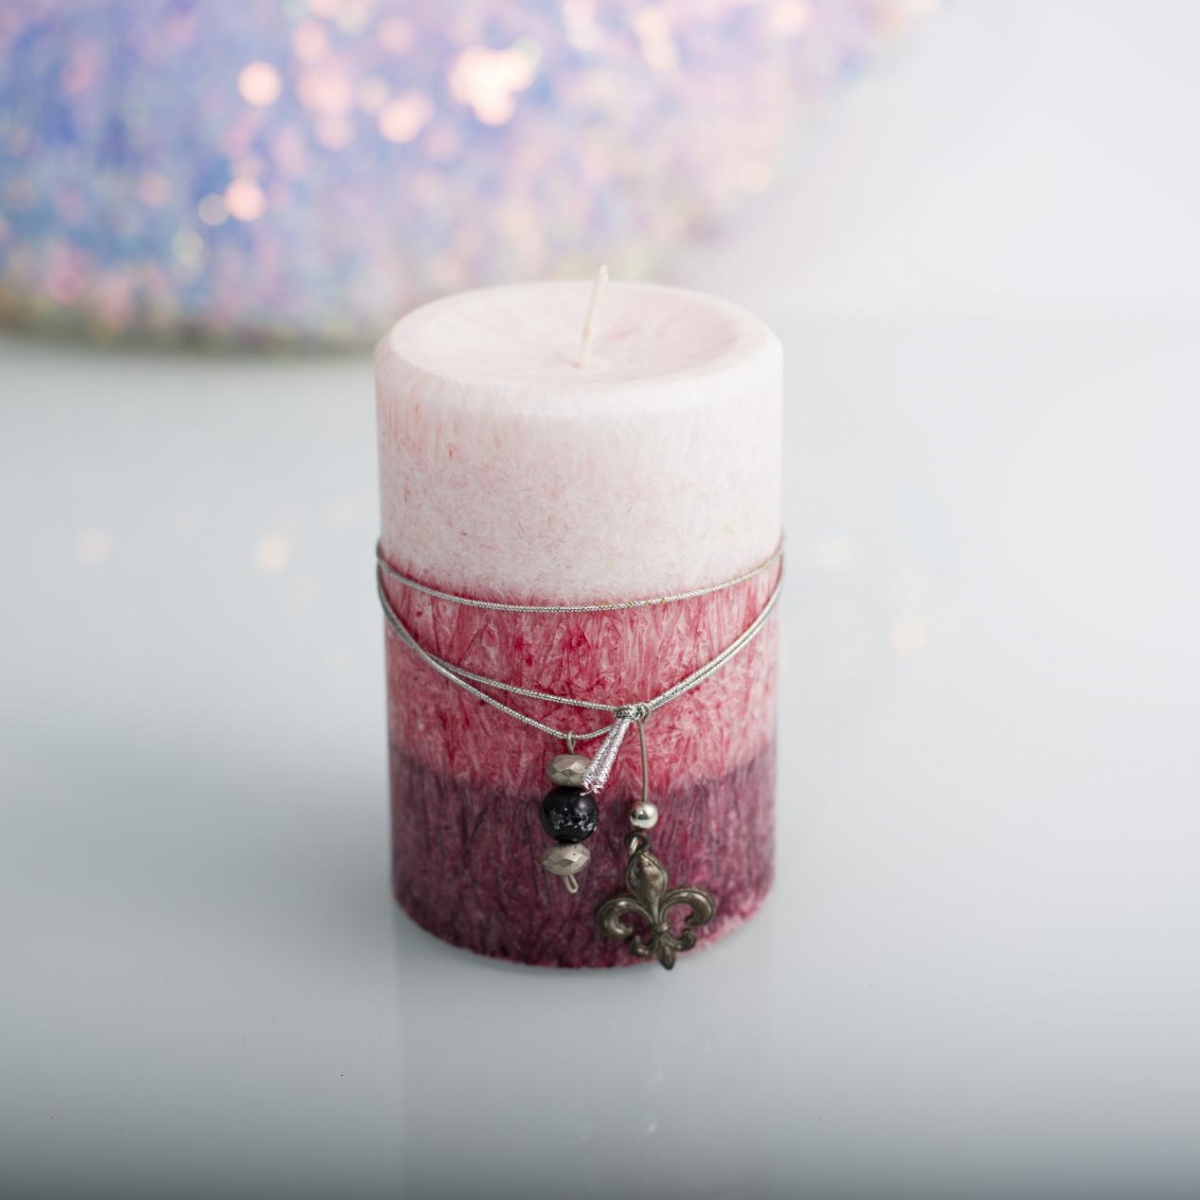 Pillar Candles ：Three Color ,Christmas Red , Rainbow ,Middle Size ,China Factory ,High Quality,Price-HOWCANDLE-Candles,Scented Candles,Aromatherapy Candles,Soy Candles,Vegan Candles,Jar Candles,Pillar Candles,Candle Gift Sets,Essential Oils,Reed Diffuser,Candle Holder,